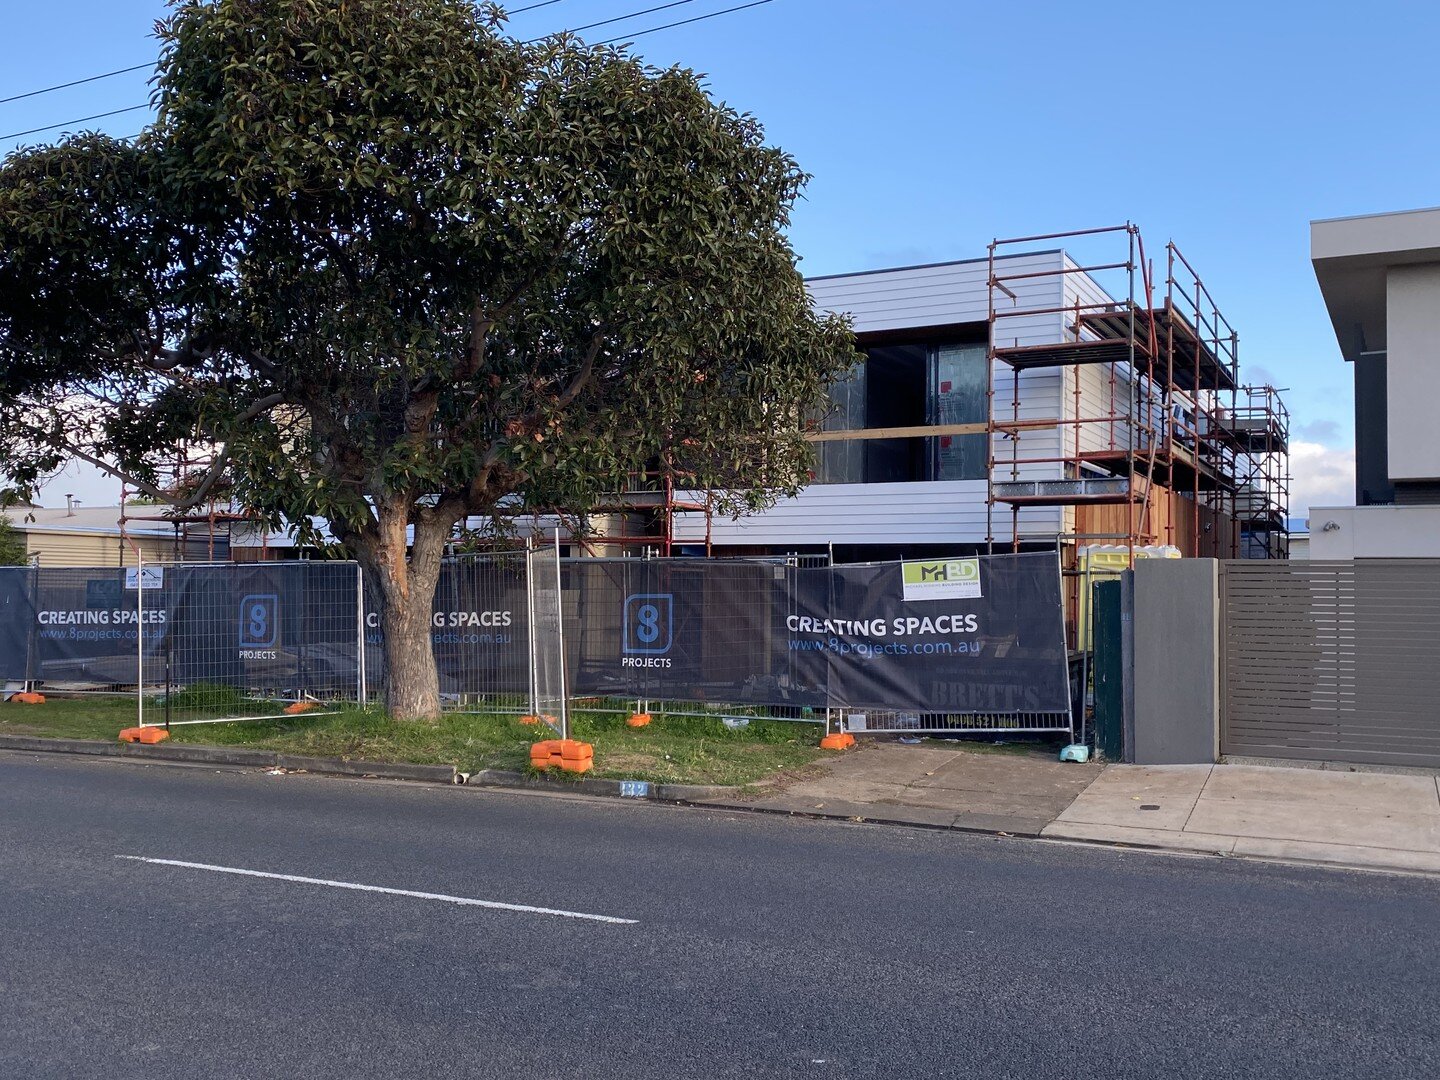 Latest unit construction in OG starting to make an impact.
@_8_projects_ @hausandhome_construction 

#buildingdesign #units #design #surfcoast #oceangrove #twostoreys
#townhouses #contemporary #jameshardie #weatherboards